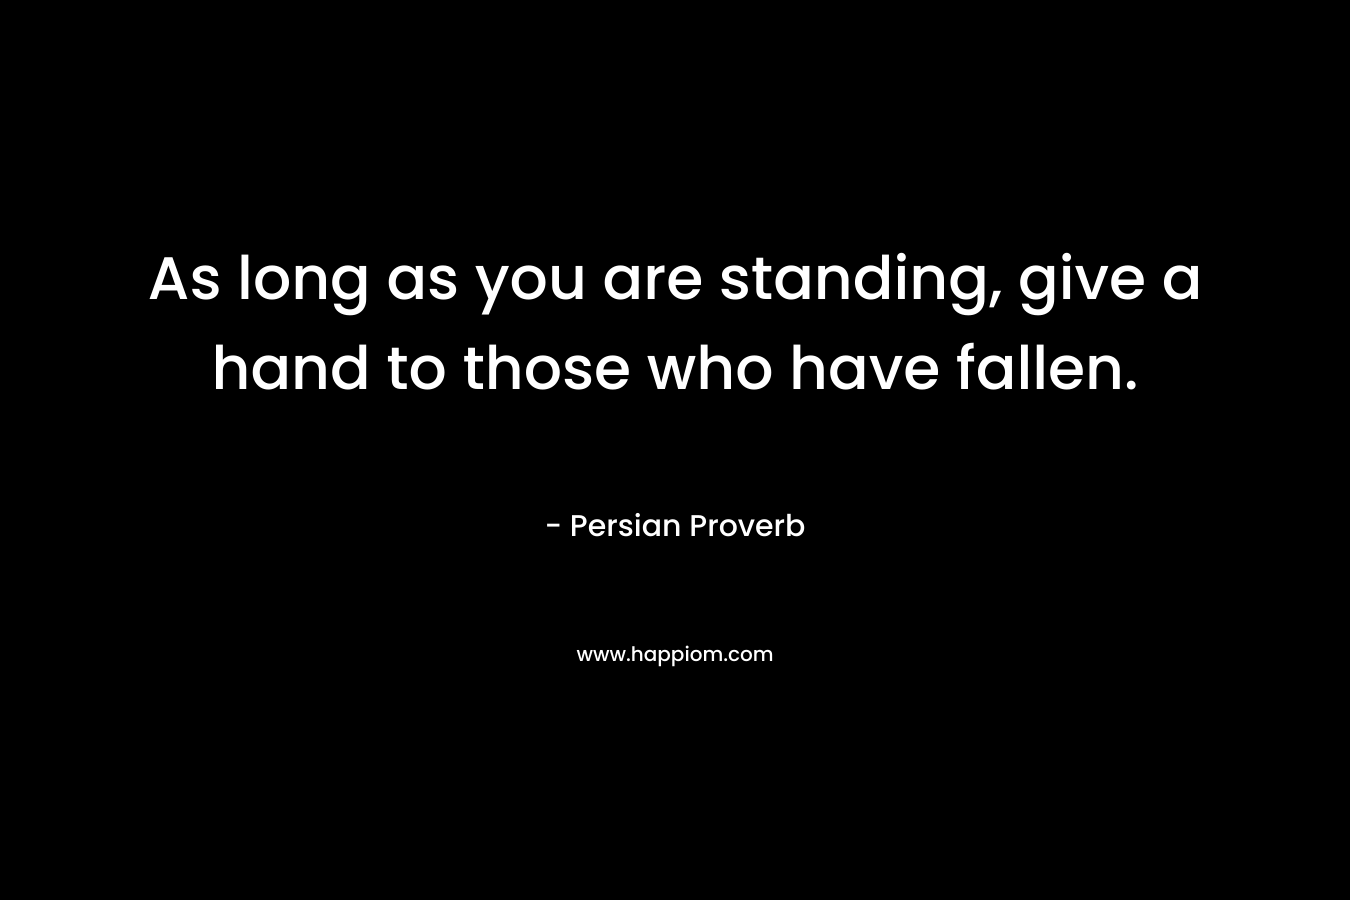 As long as you are standing, give a hand to those who have fallen. – Persian Proverb